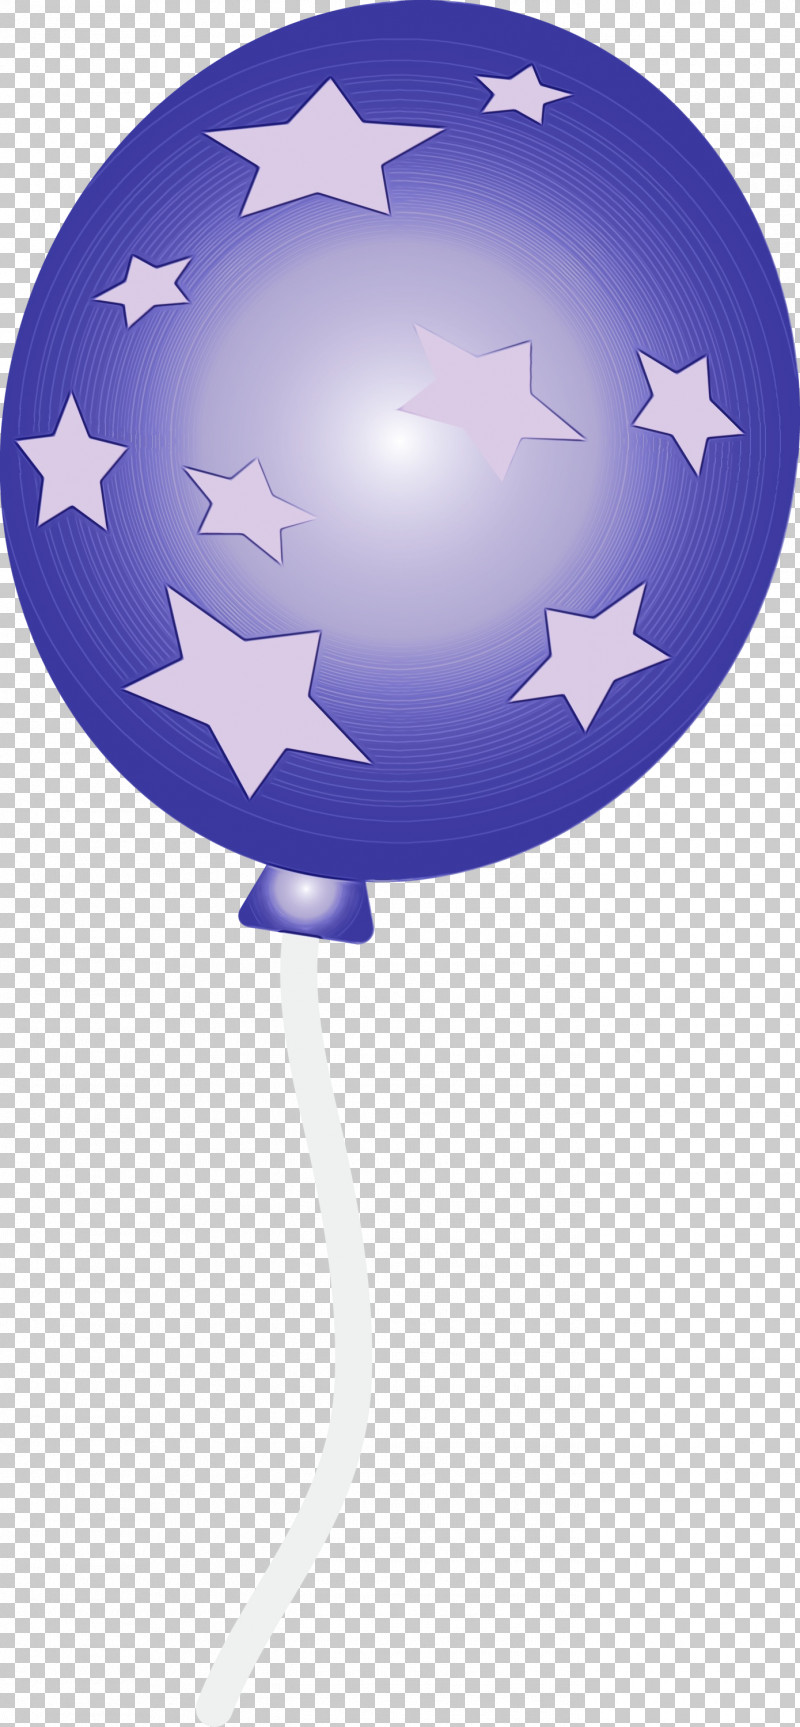 Flag Tree Electric Blue Star PNG, Clipart, Balloon, Electric Blue, Flag, Paint, Star Free PNG Download